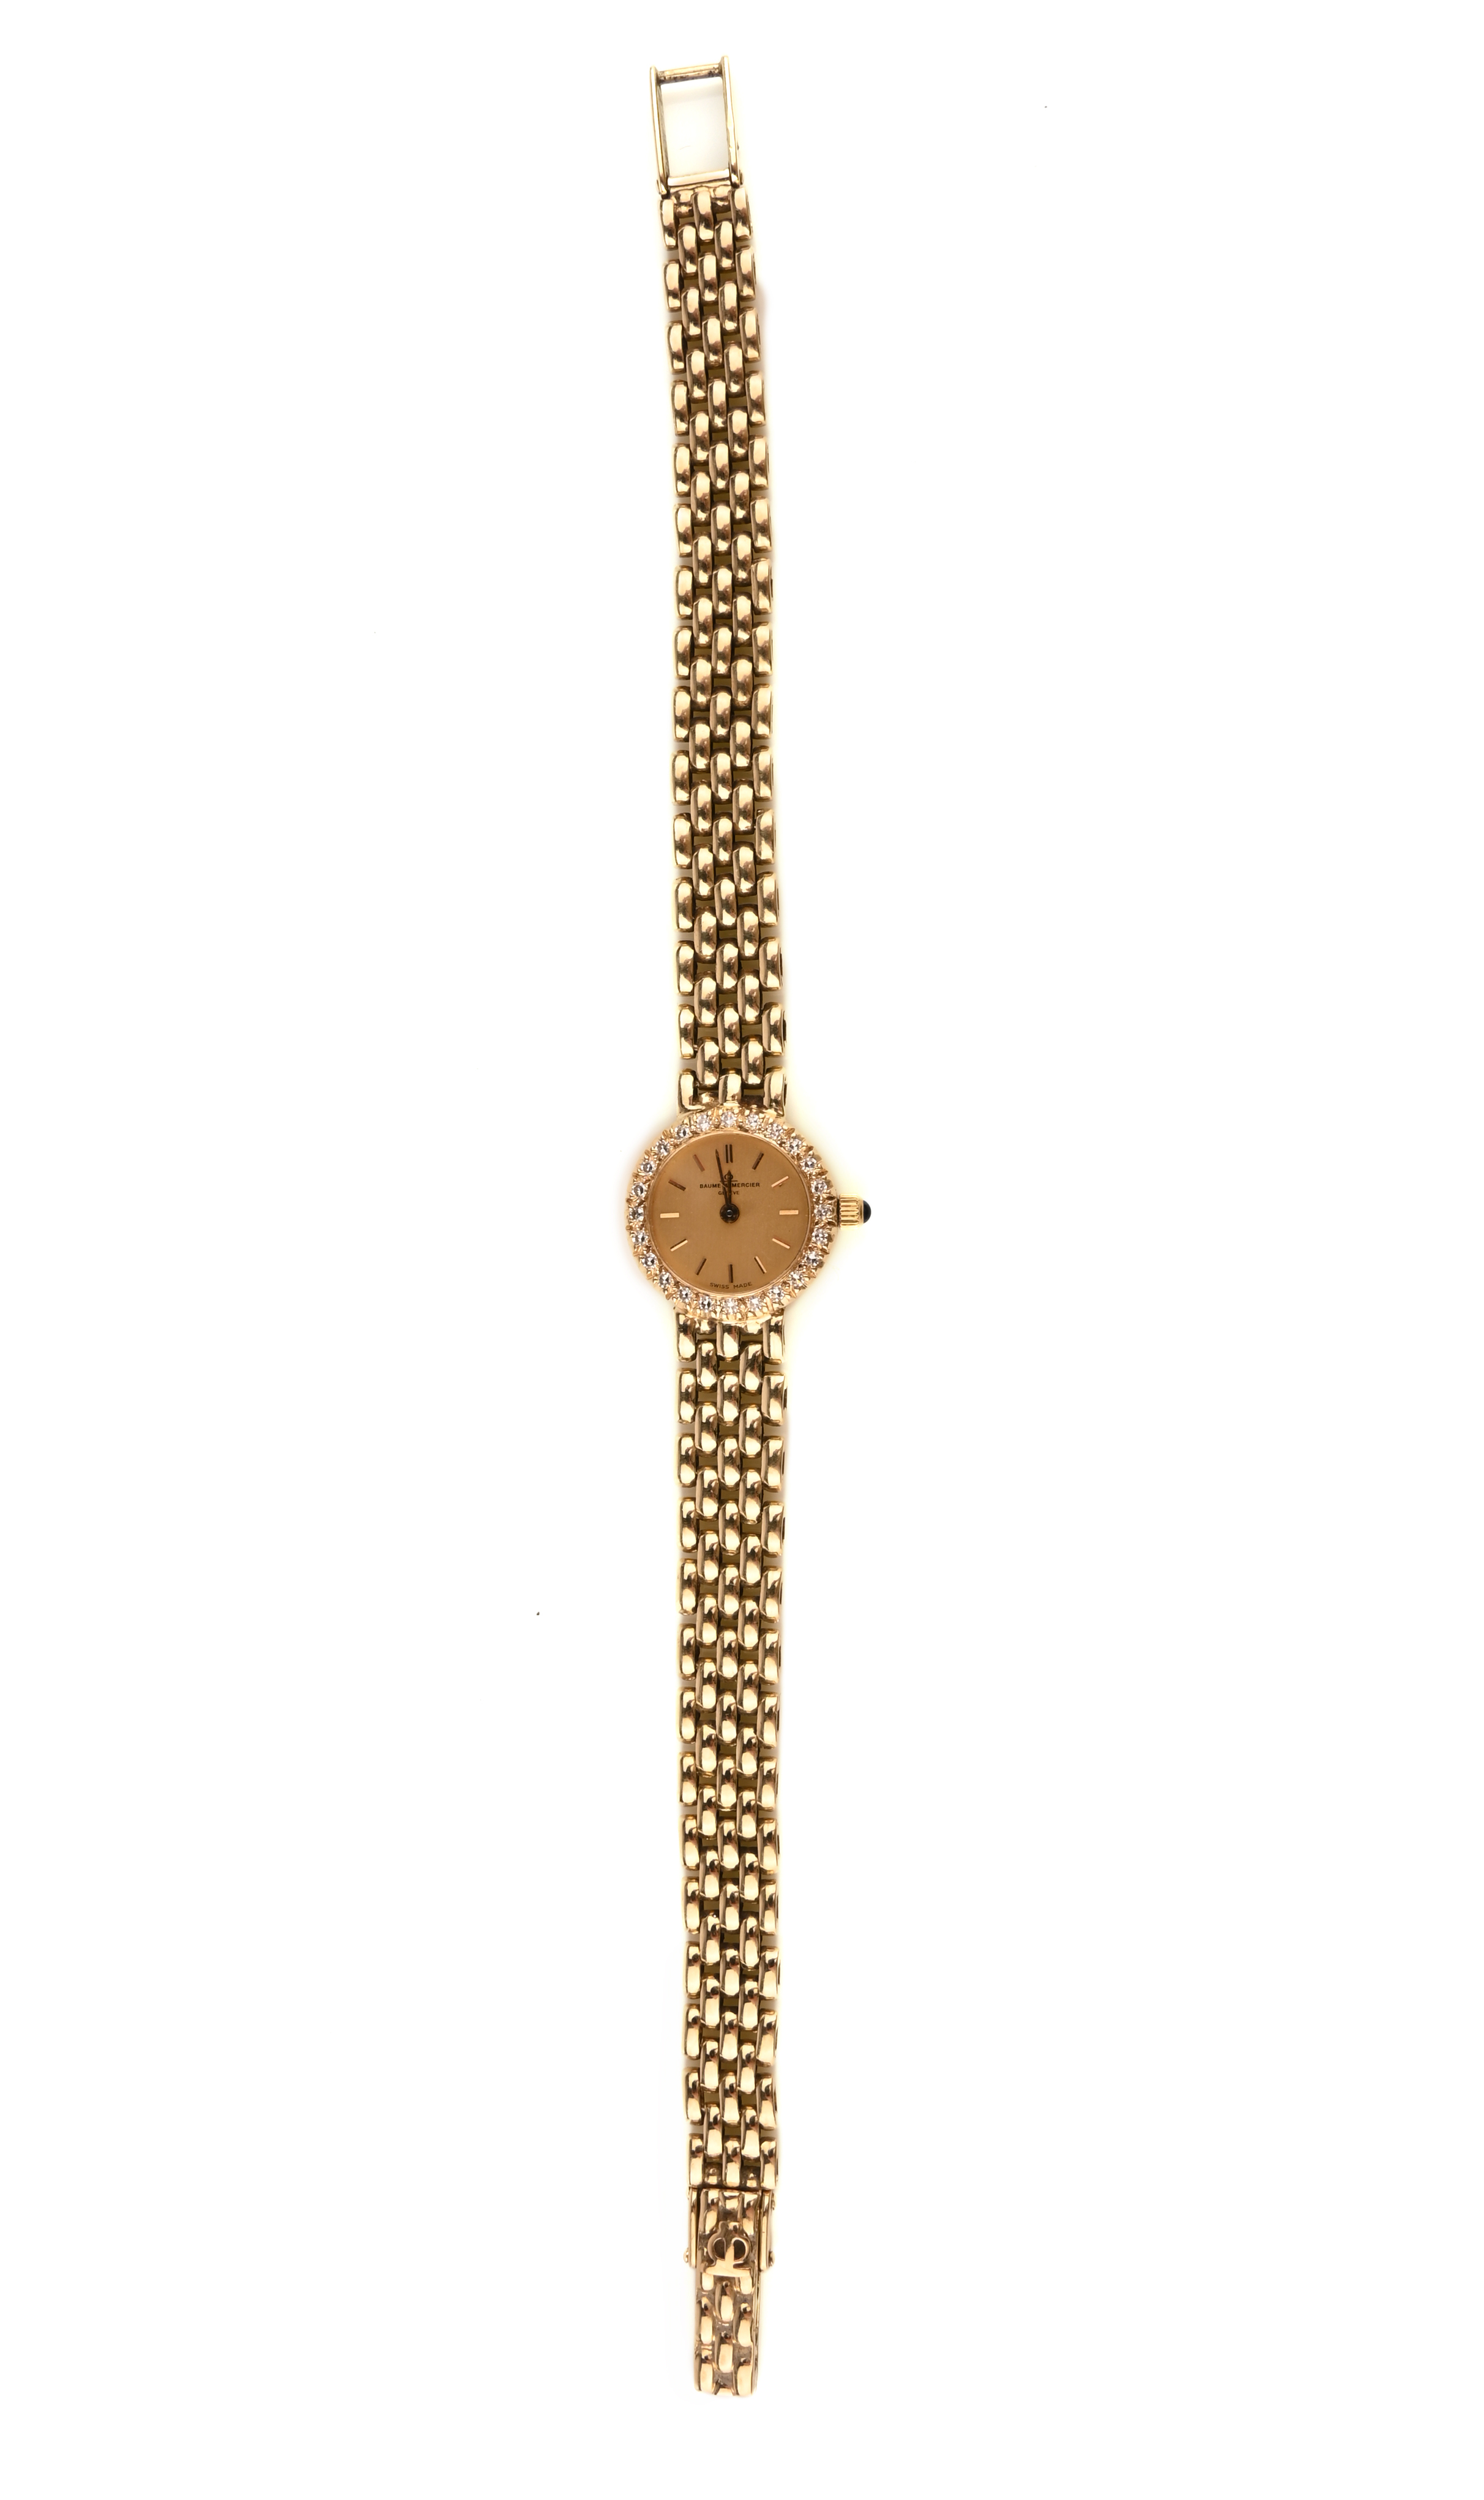 A lady's 14ct gold and diamond wristwatch, Baume & Mercier, the circular gold dial with baton